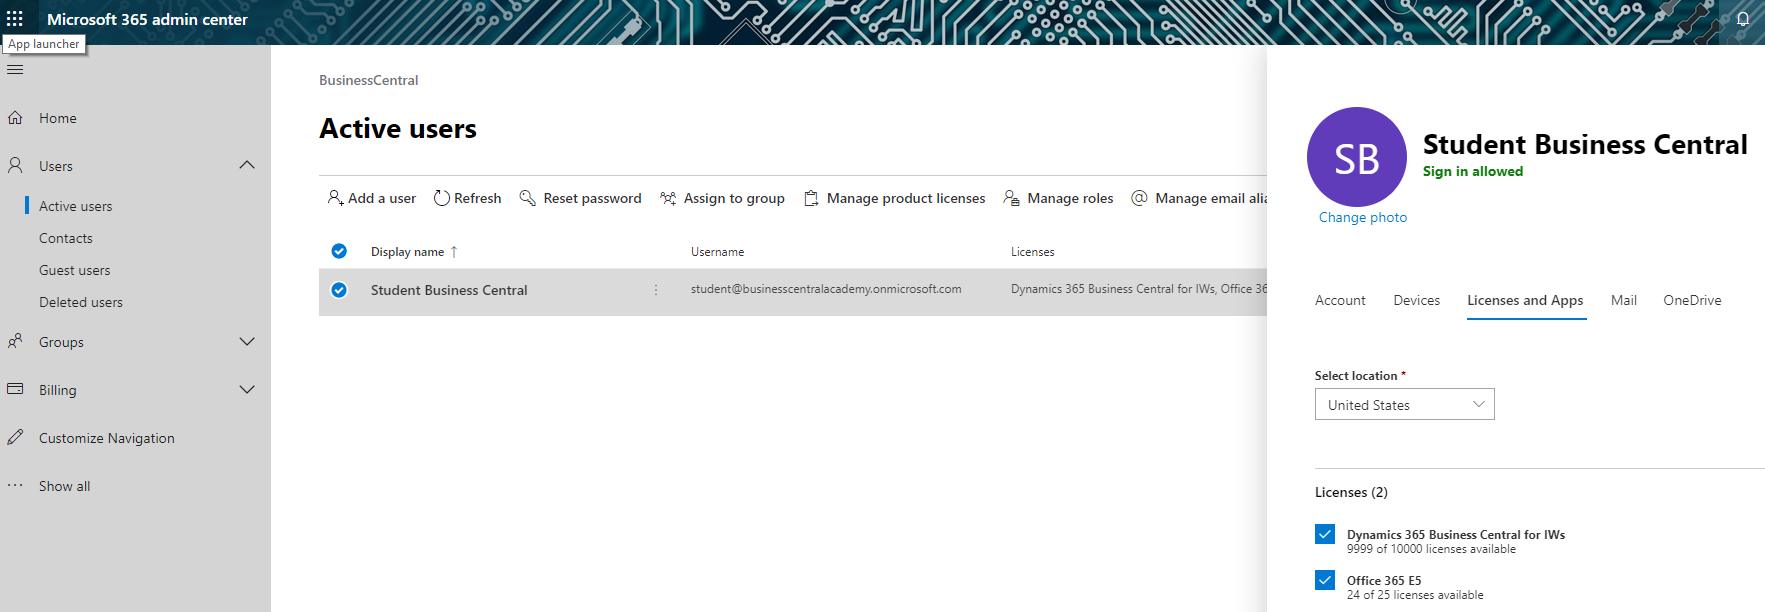 Screenshot of the admin center showing Microsoft 365 authentication.